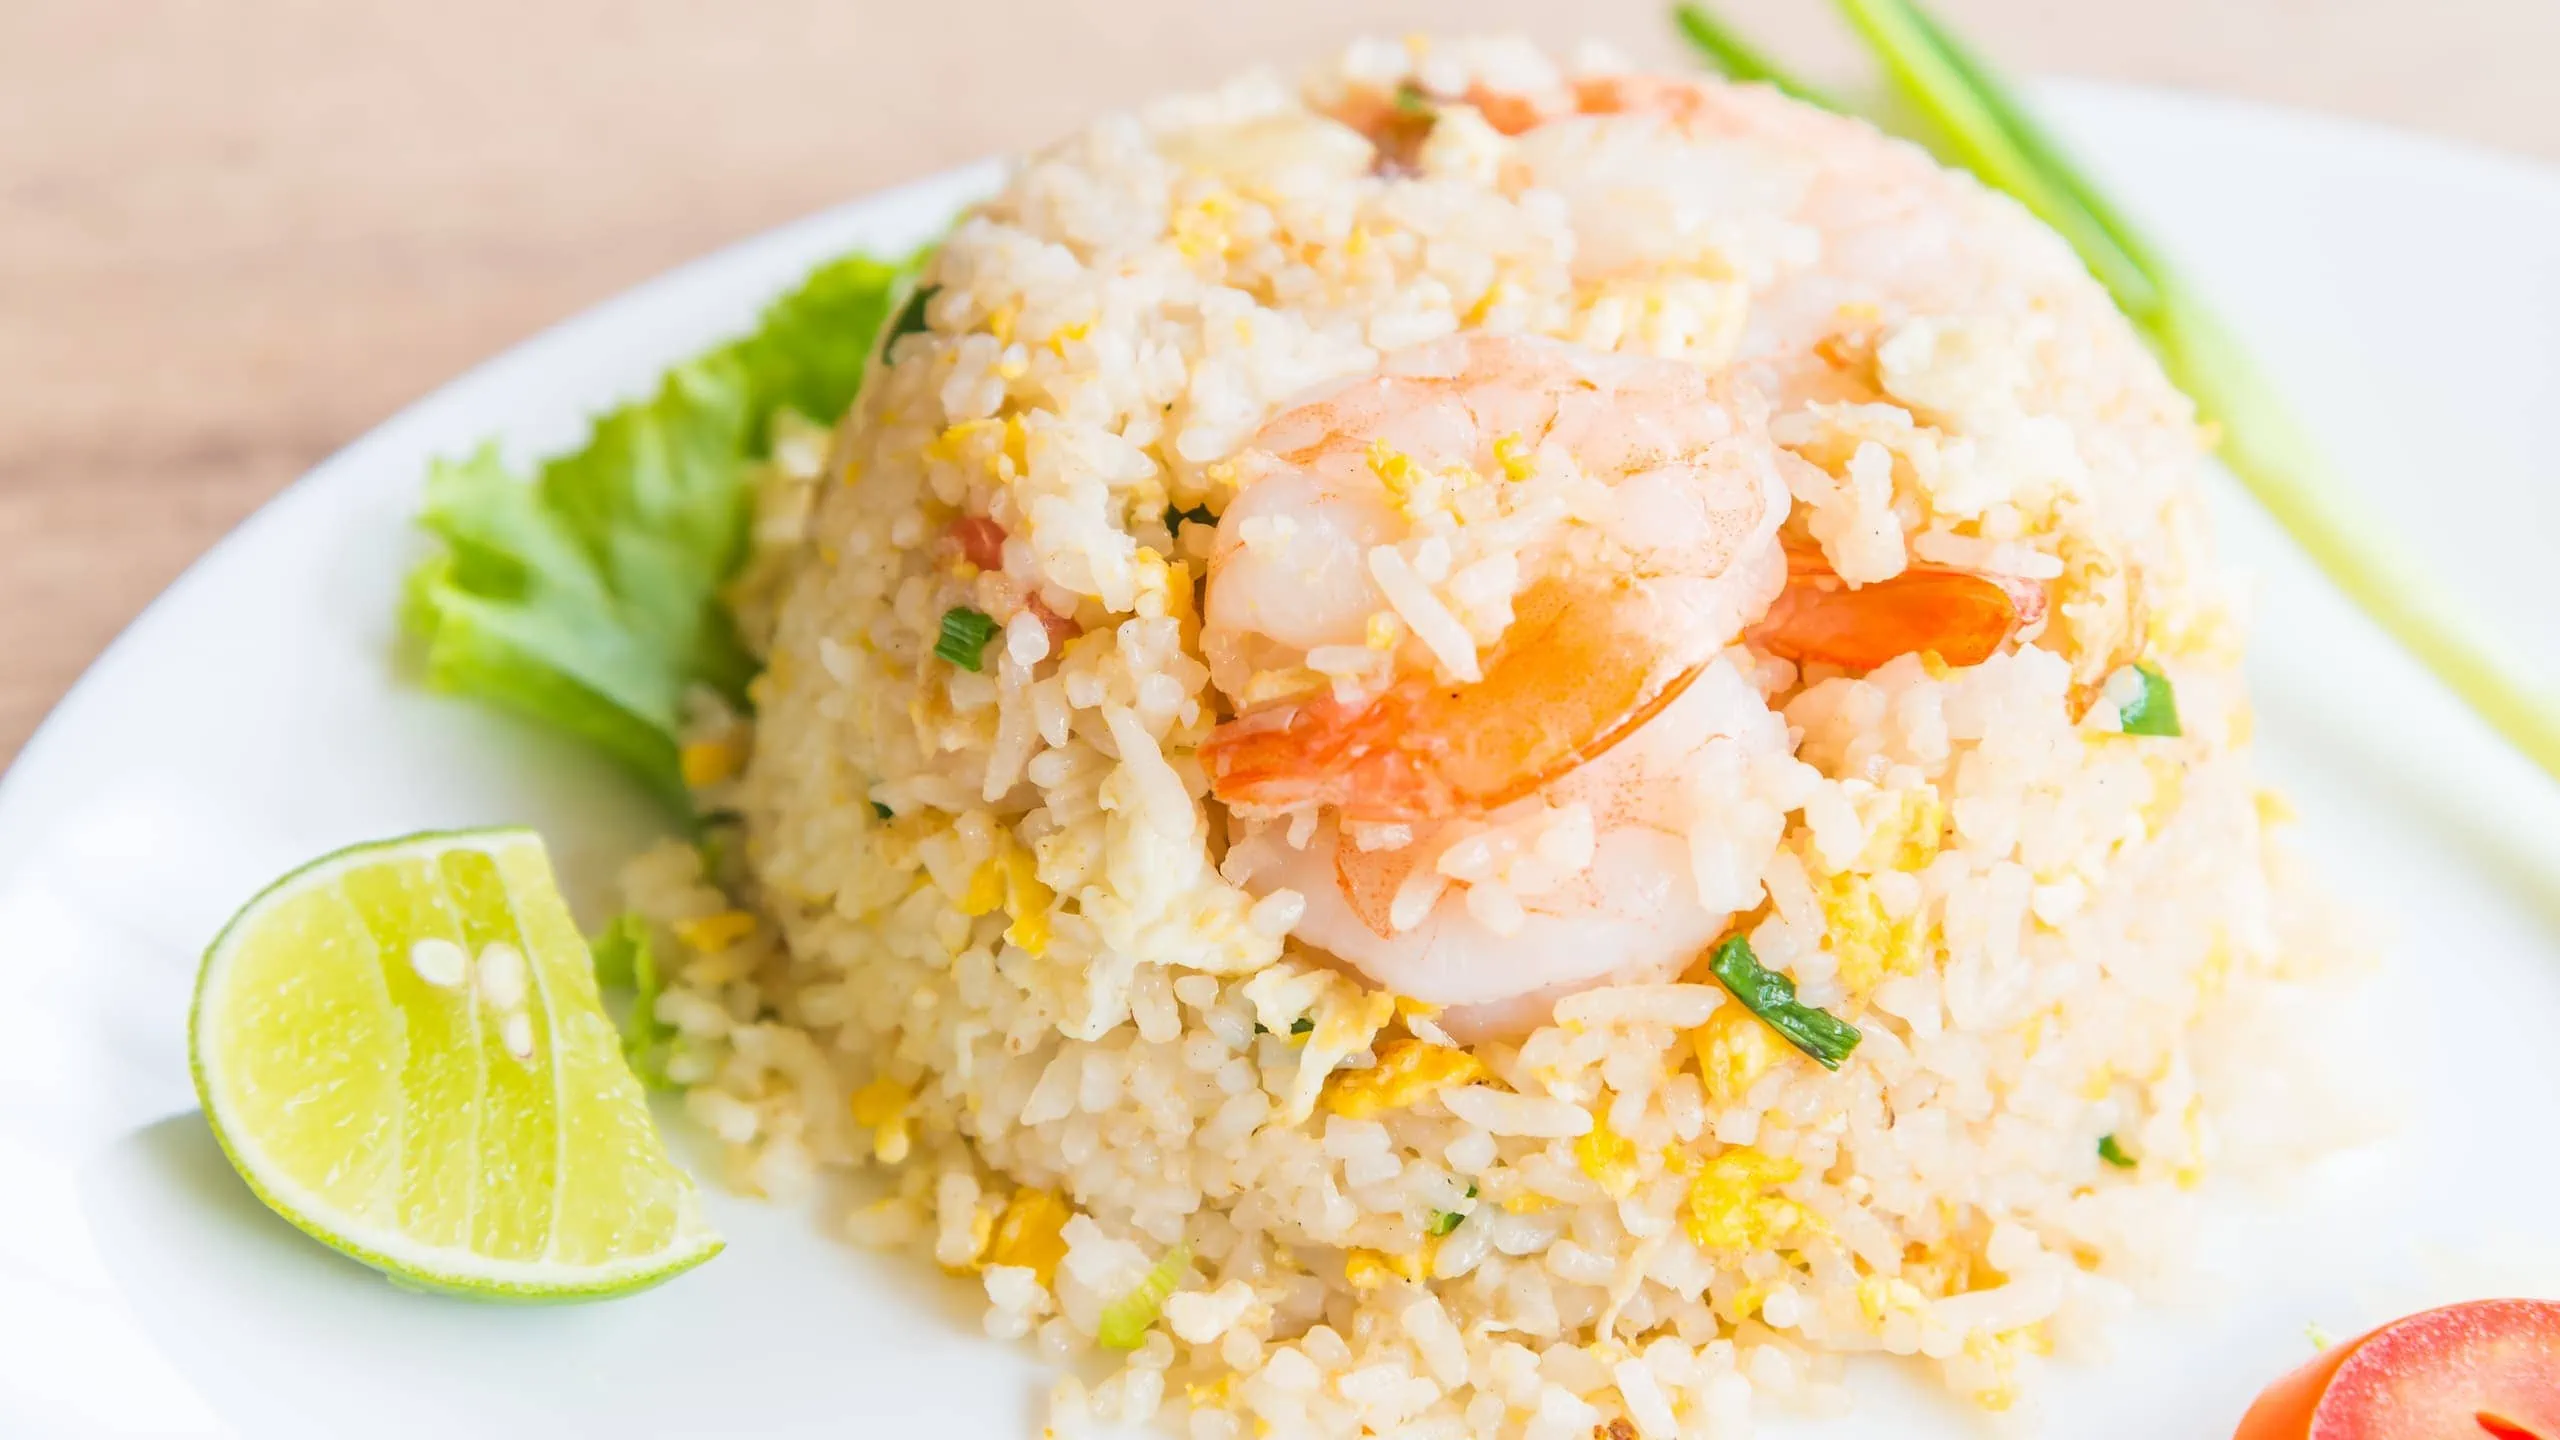 Our-inspired Din Tai Fung fried rice recipe with shrimp